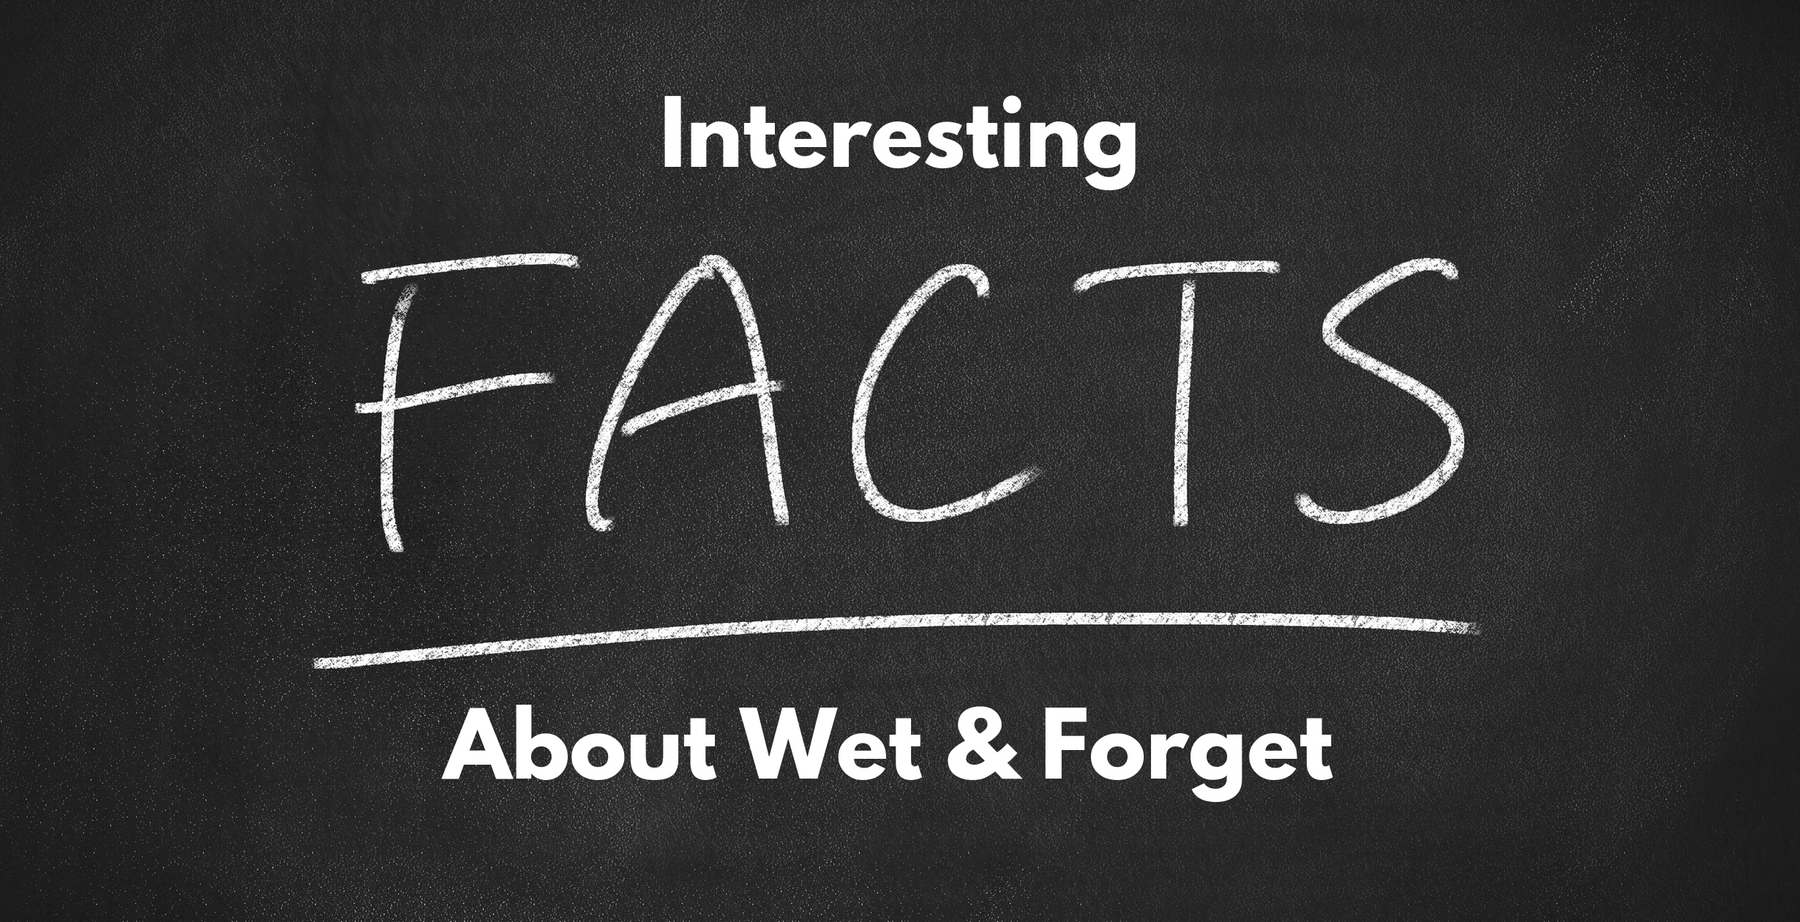 Wet & Forget Interesting Facts